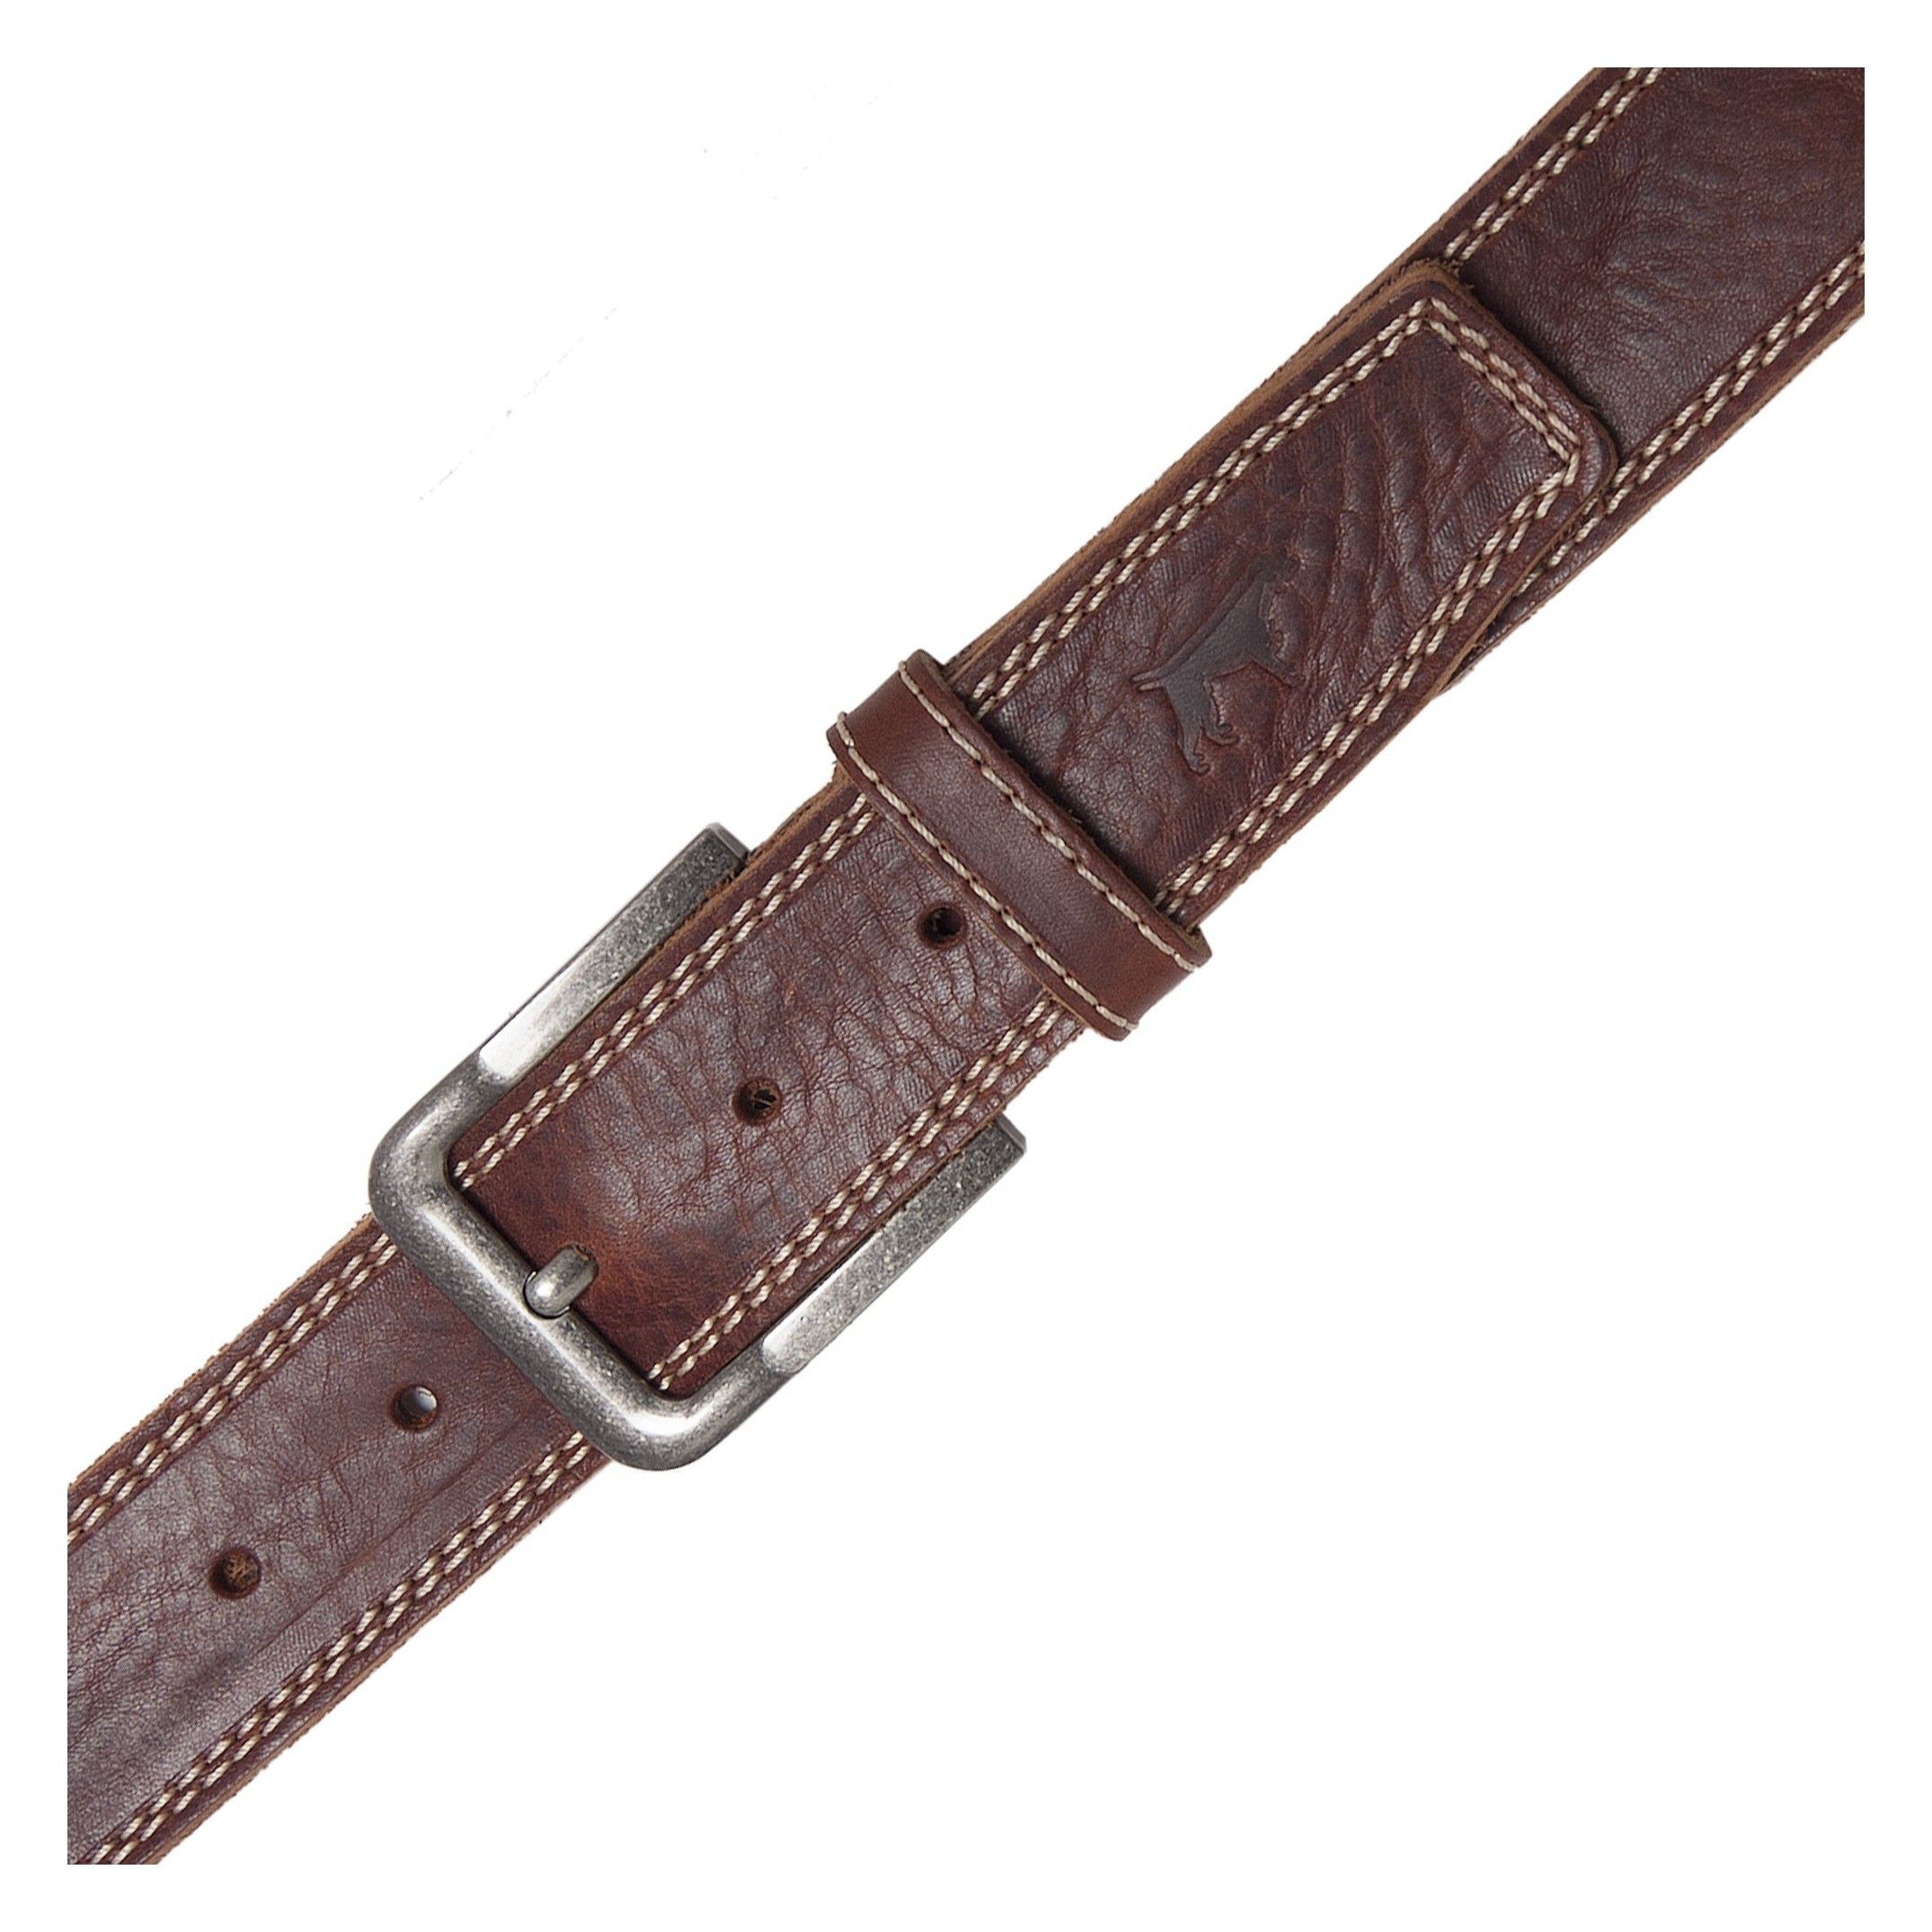 Castellanisimos men's leather belt with double stitching in beige. Metal buckle. Width: 3,5cm. MADE IN SPAIN.